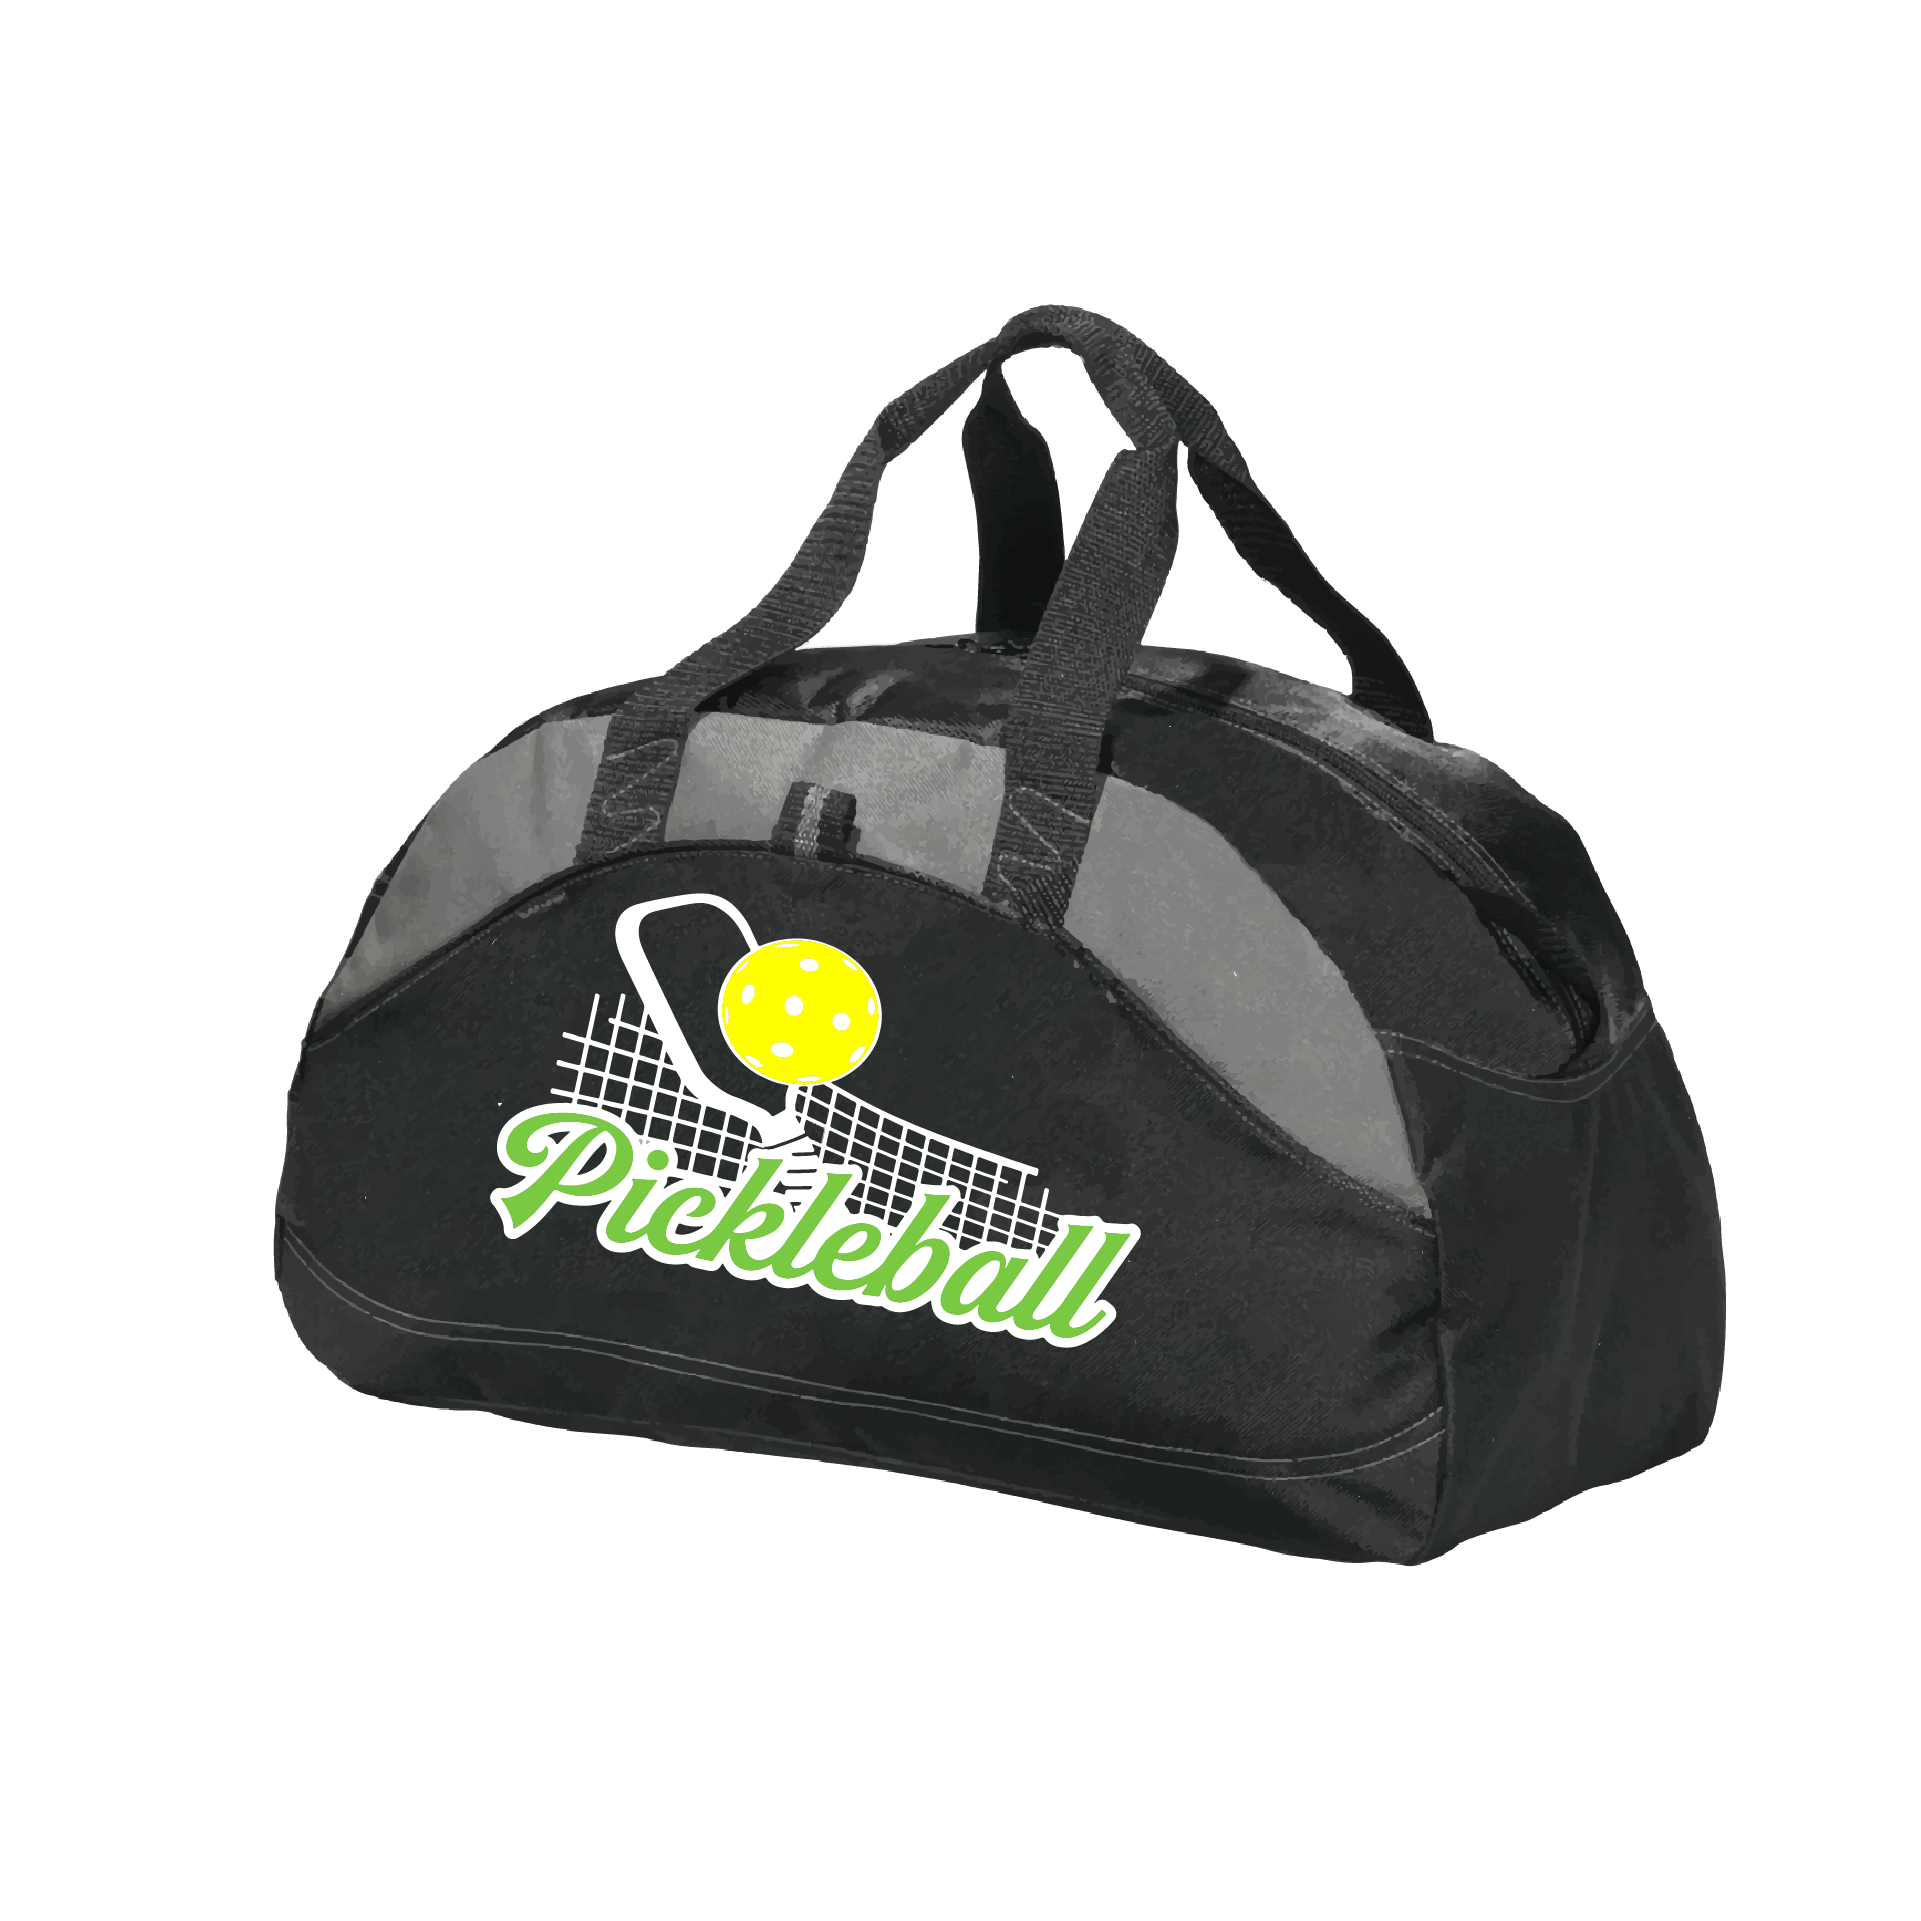 Picklebal Duffel Bag Design: Pickleball Net & Paddle  Carry your gear in comfort and style. This fun pickleball duffel bag is the perfect accessory for all pickleball players needing to keep their gear in one place. This medium sized duffel tote is ideal for all your pickleball activities. The large center compartment allows for plenty of space and the mesh end pocket is perfect for holding a water bottle.